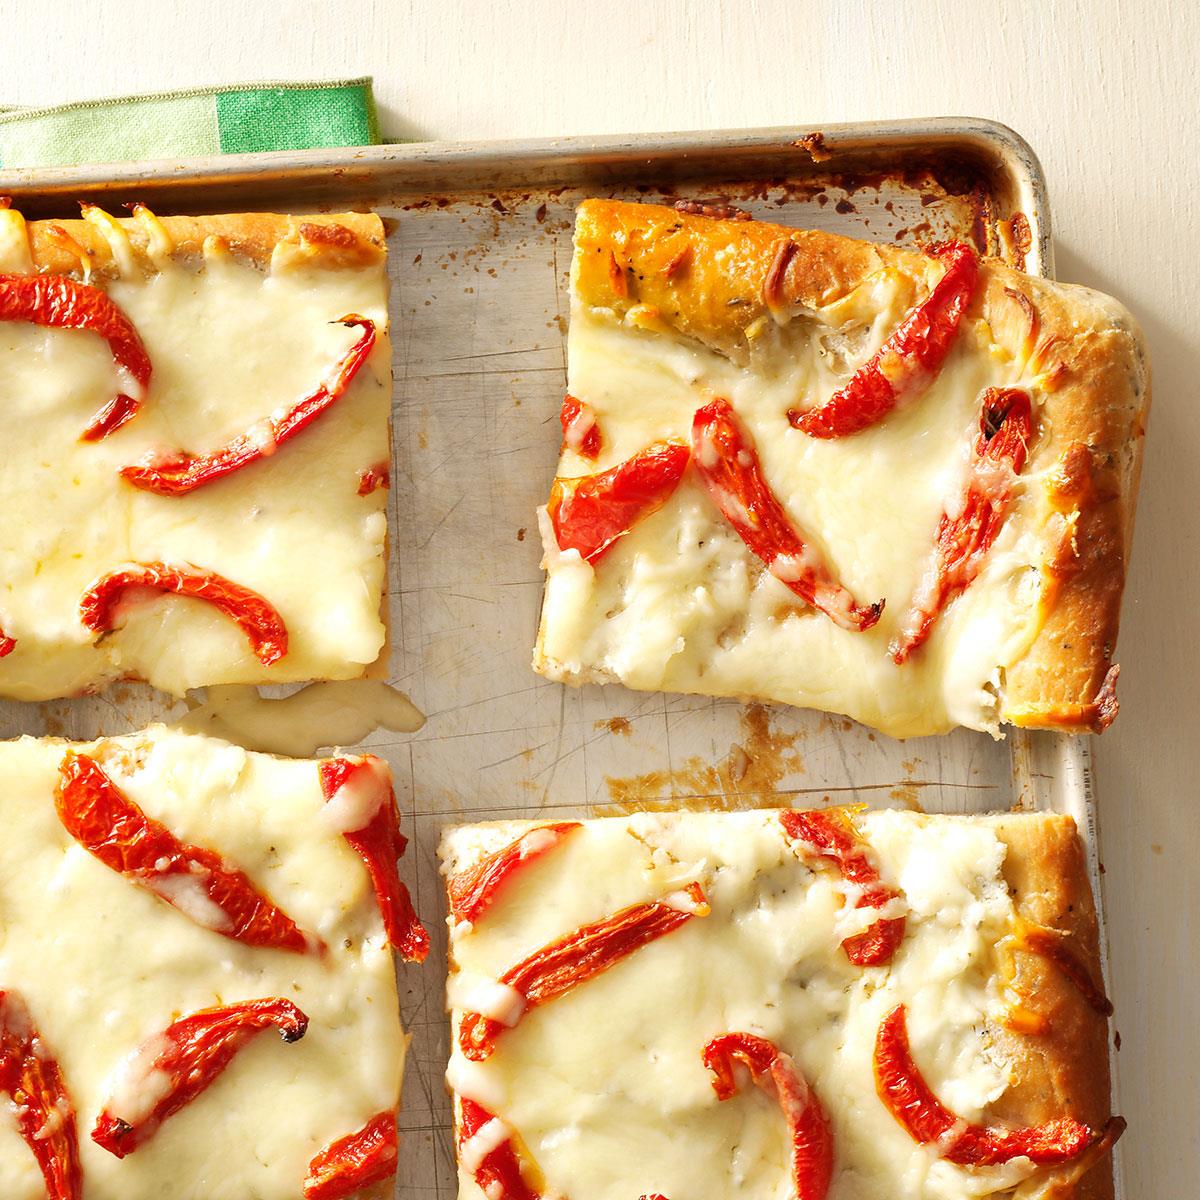 Like my grandmother taught me, I love using fresh, simple ingredients. In this low-cost recipe, creamy ricotta brings out the sweetness of the tomatoes, all on an onion and herb crust. —Debbie Roppolo, San Marcos, Texas <a href="https://www.tasteofhome.com/recipes/white-pizza-with-roasted-tomatoes/">Get Recipe</a>